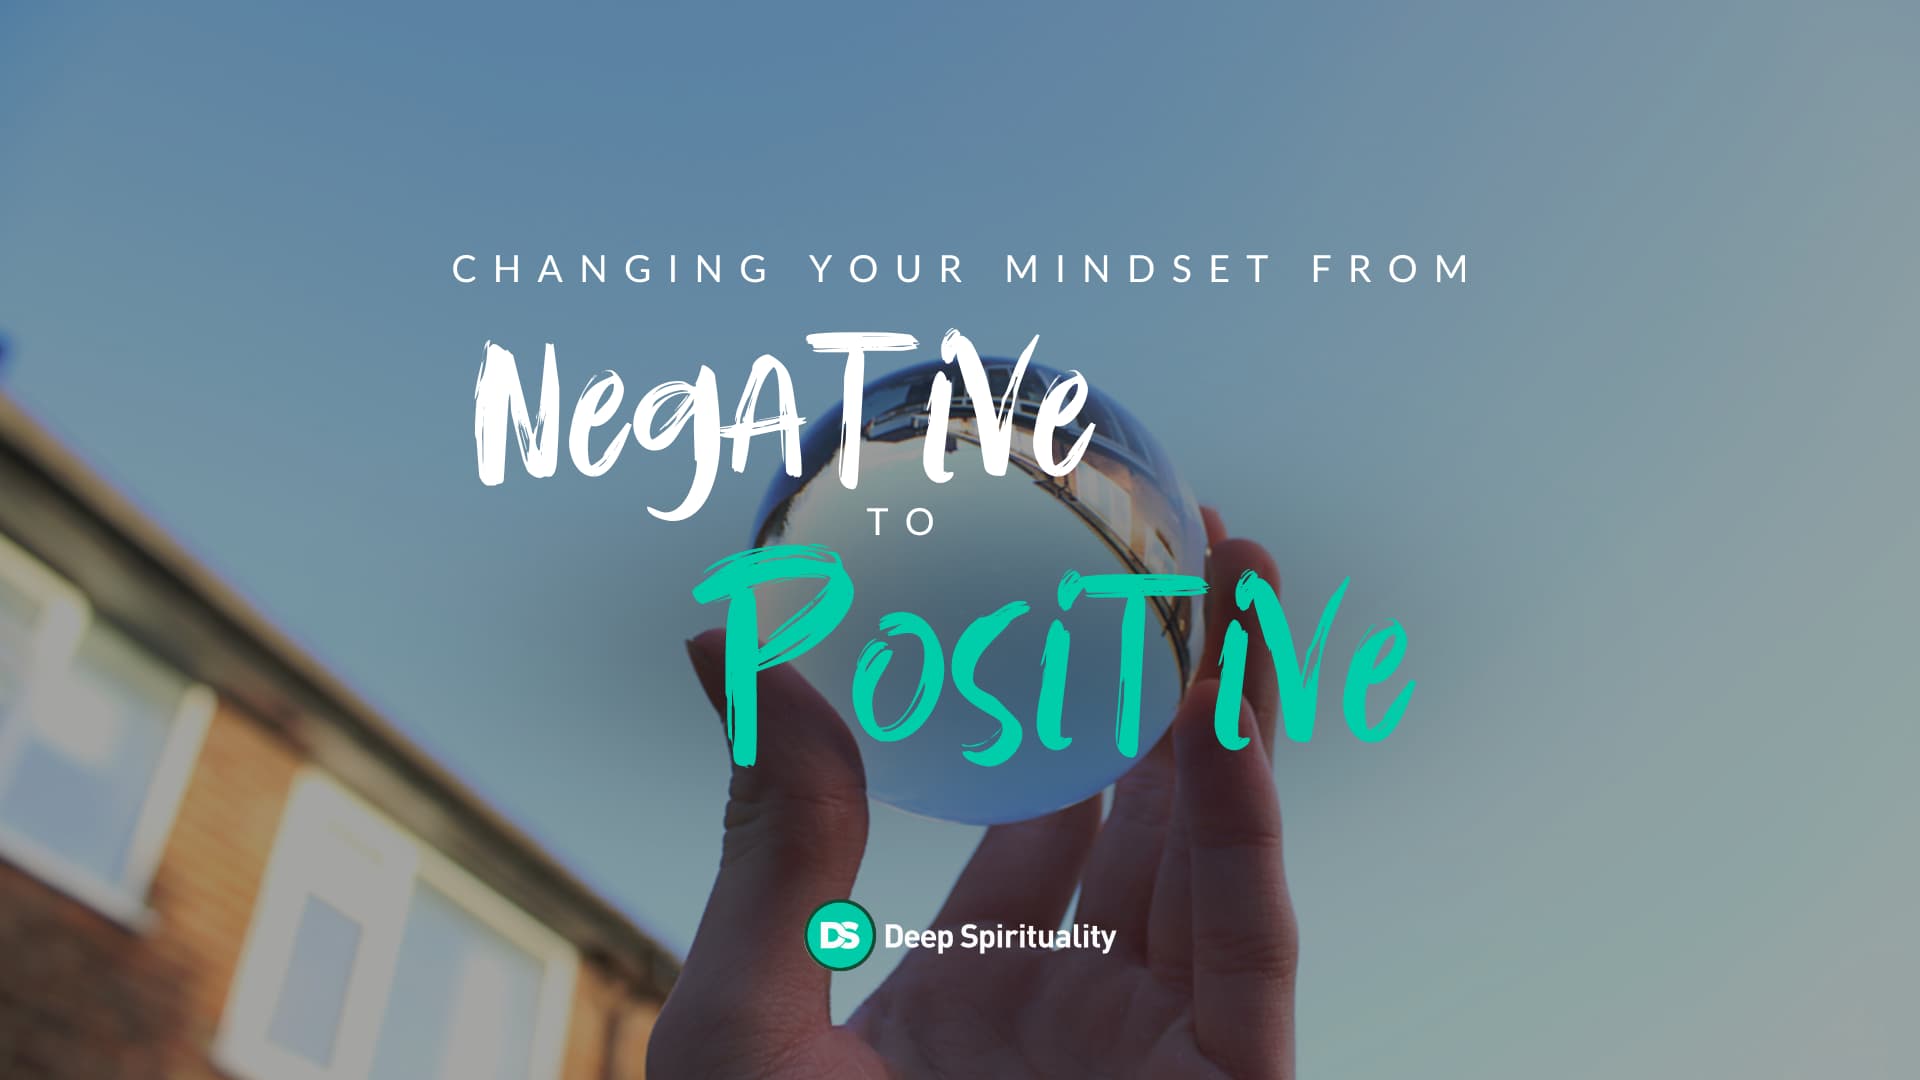 Changing Your Mindset From Negative to Positive  6